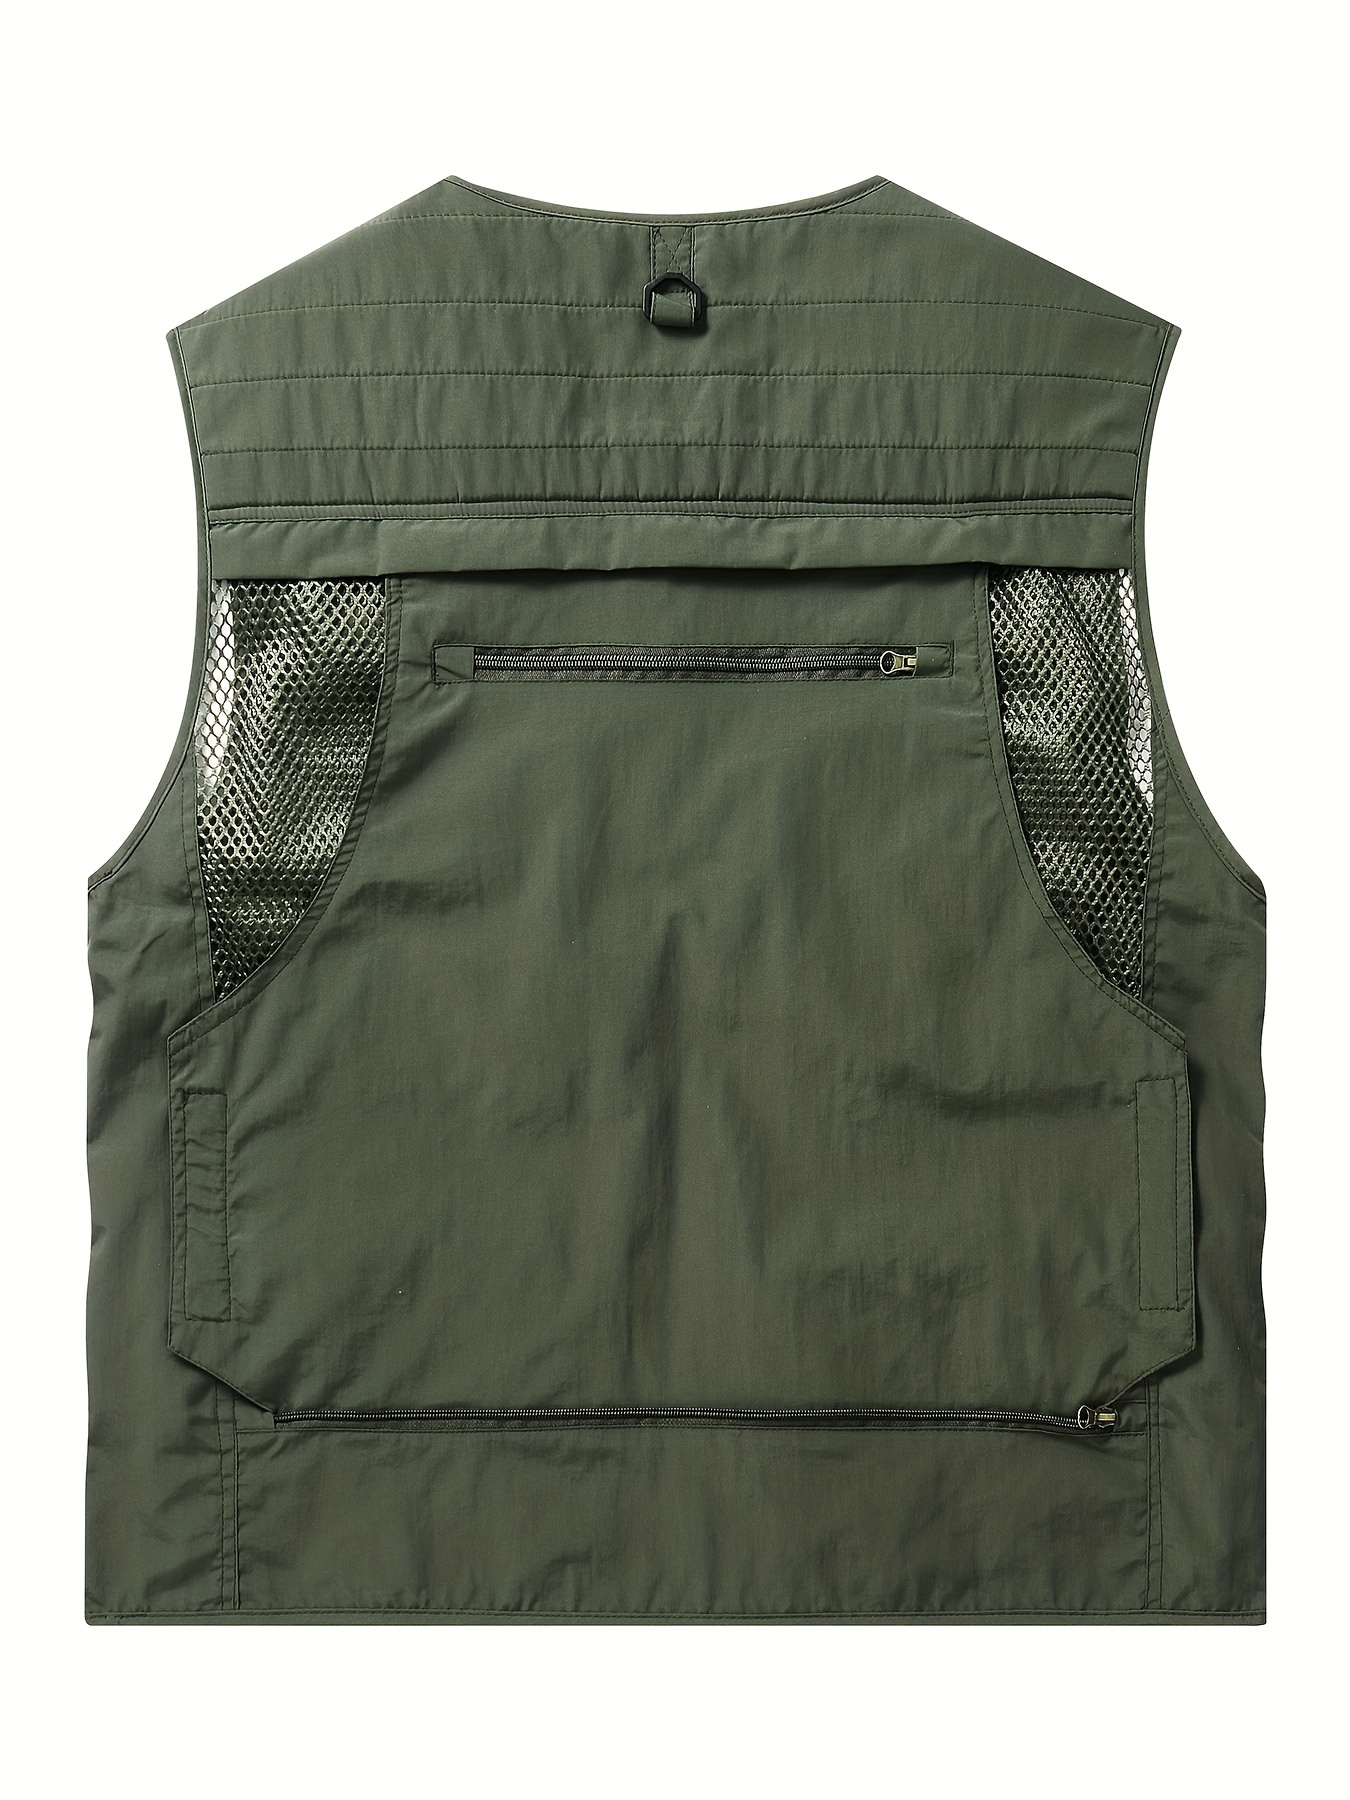 Men's Breathable Mesh Vest With Multi Pockets For Fishing Hiking Outdoor Summer,Gilet,Waistcoat